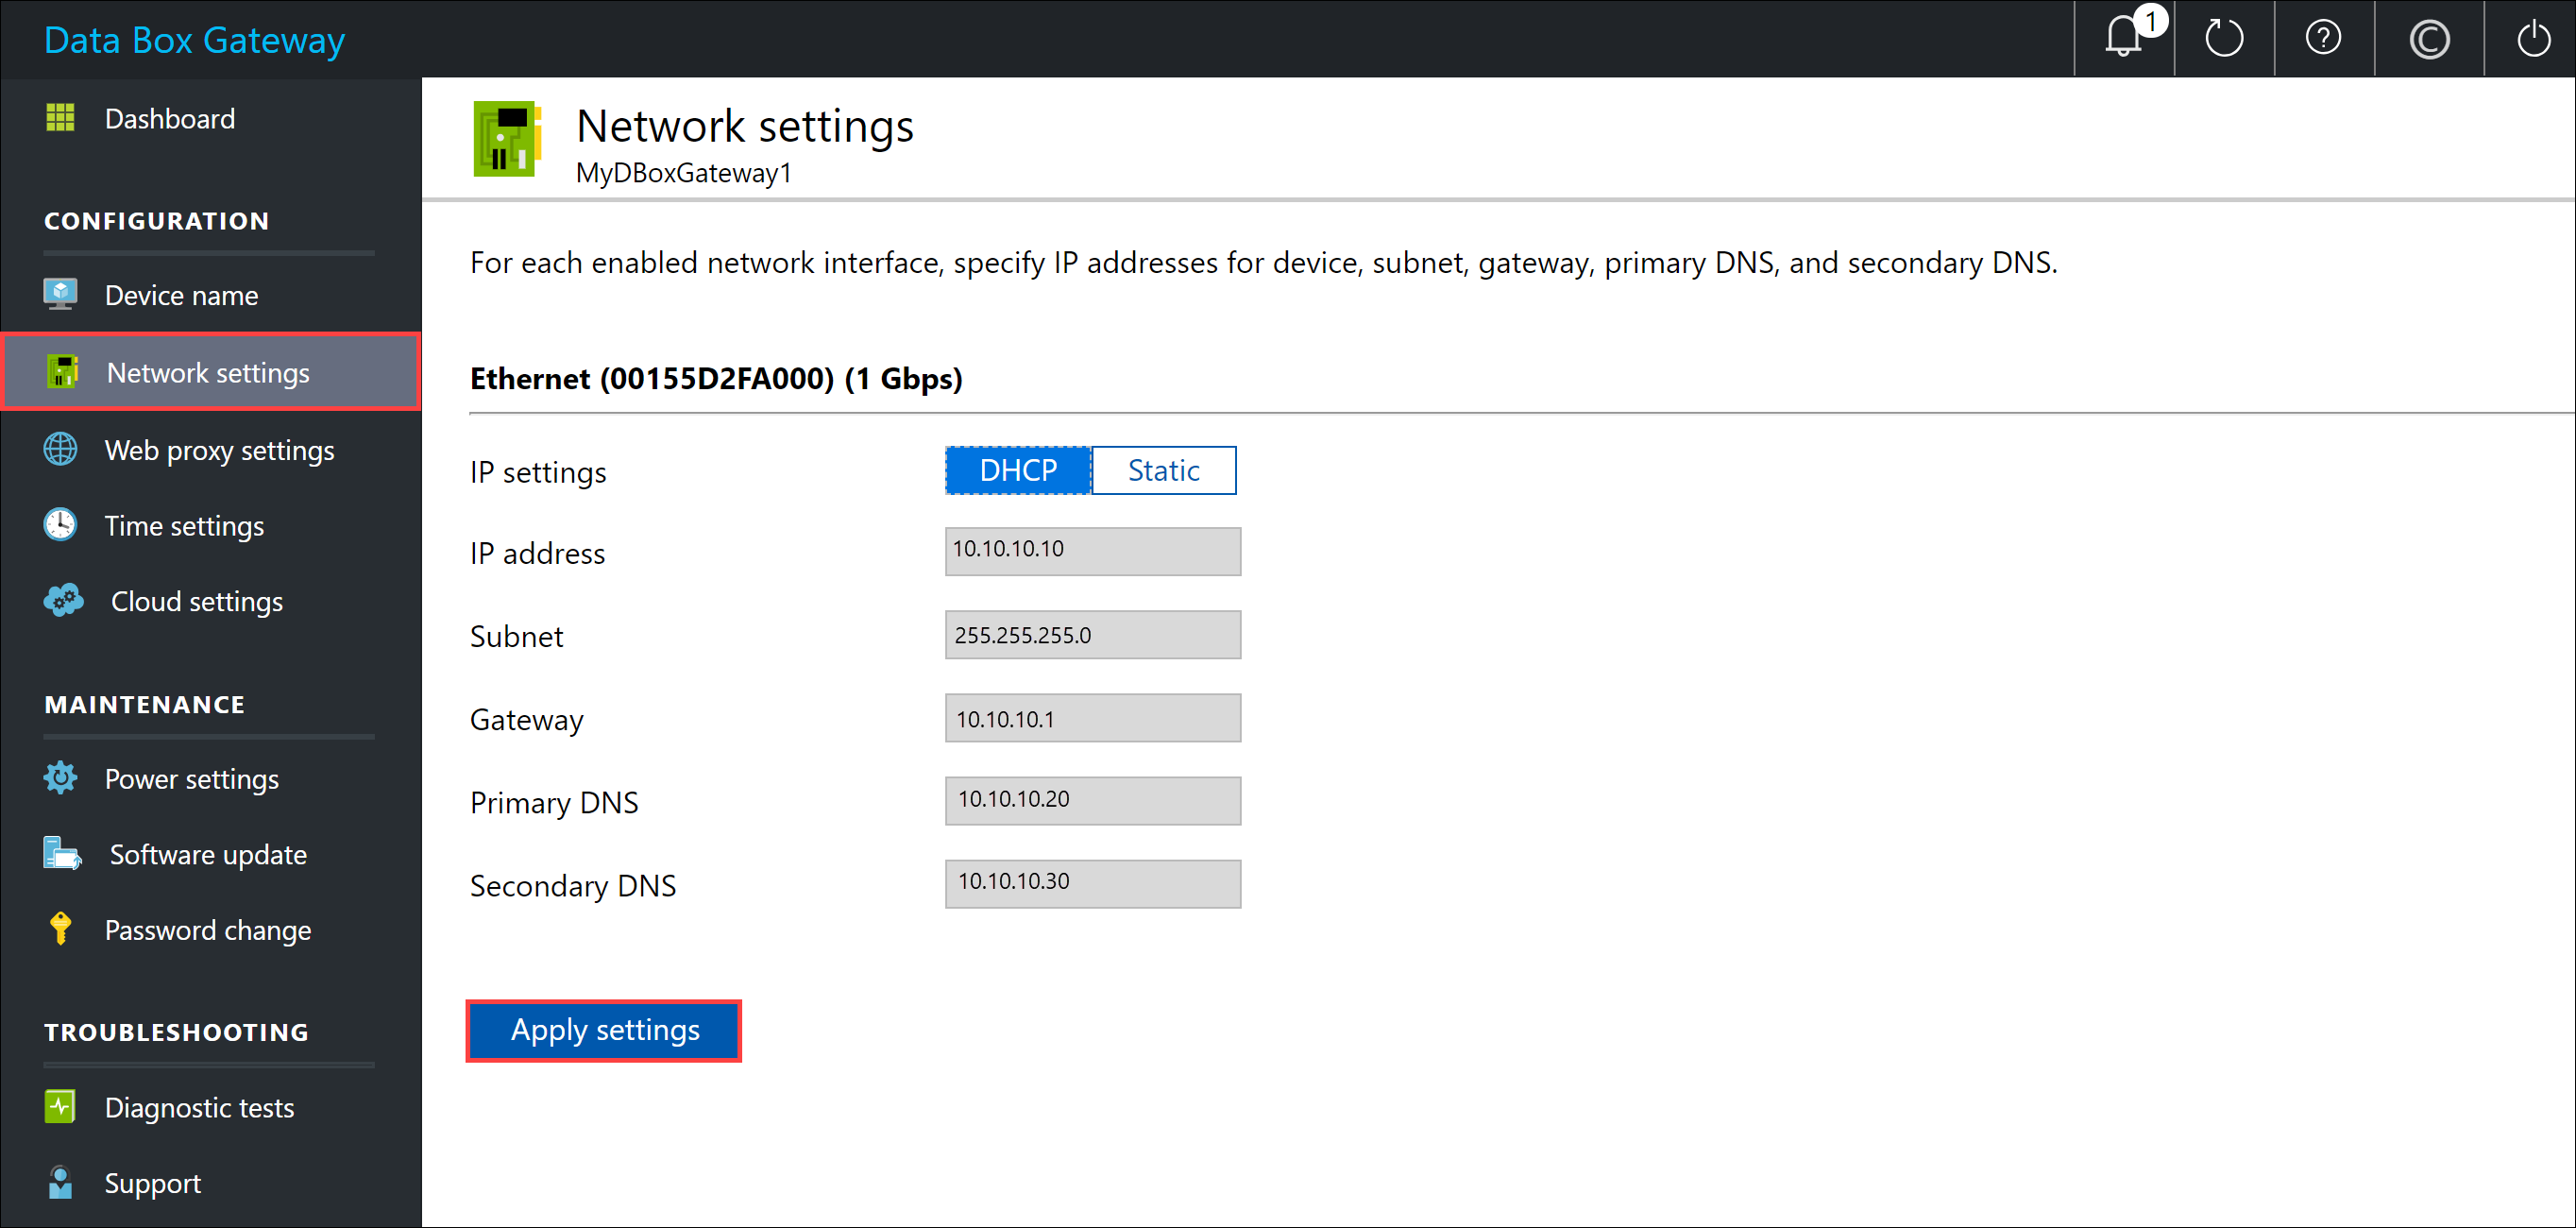 Local web UI "Network settings" page